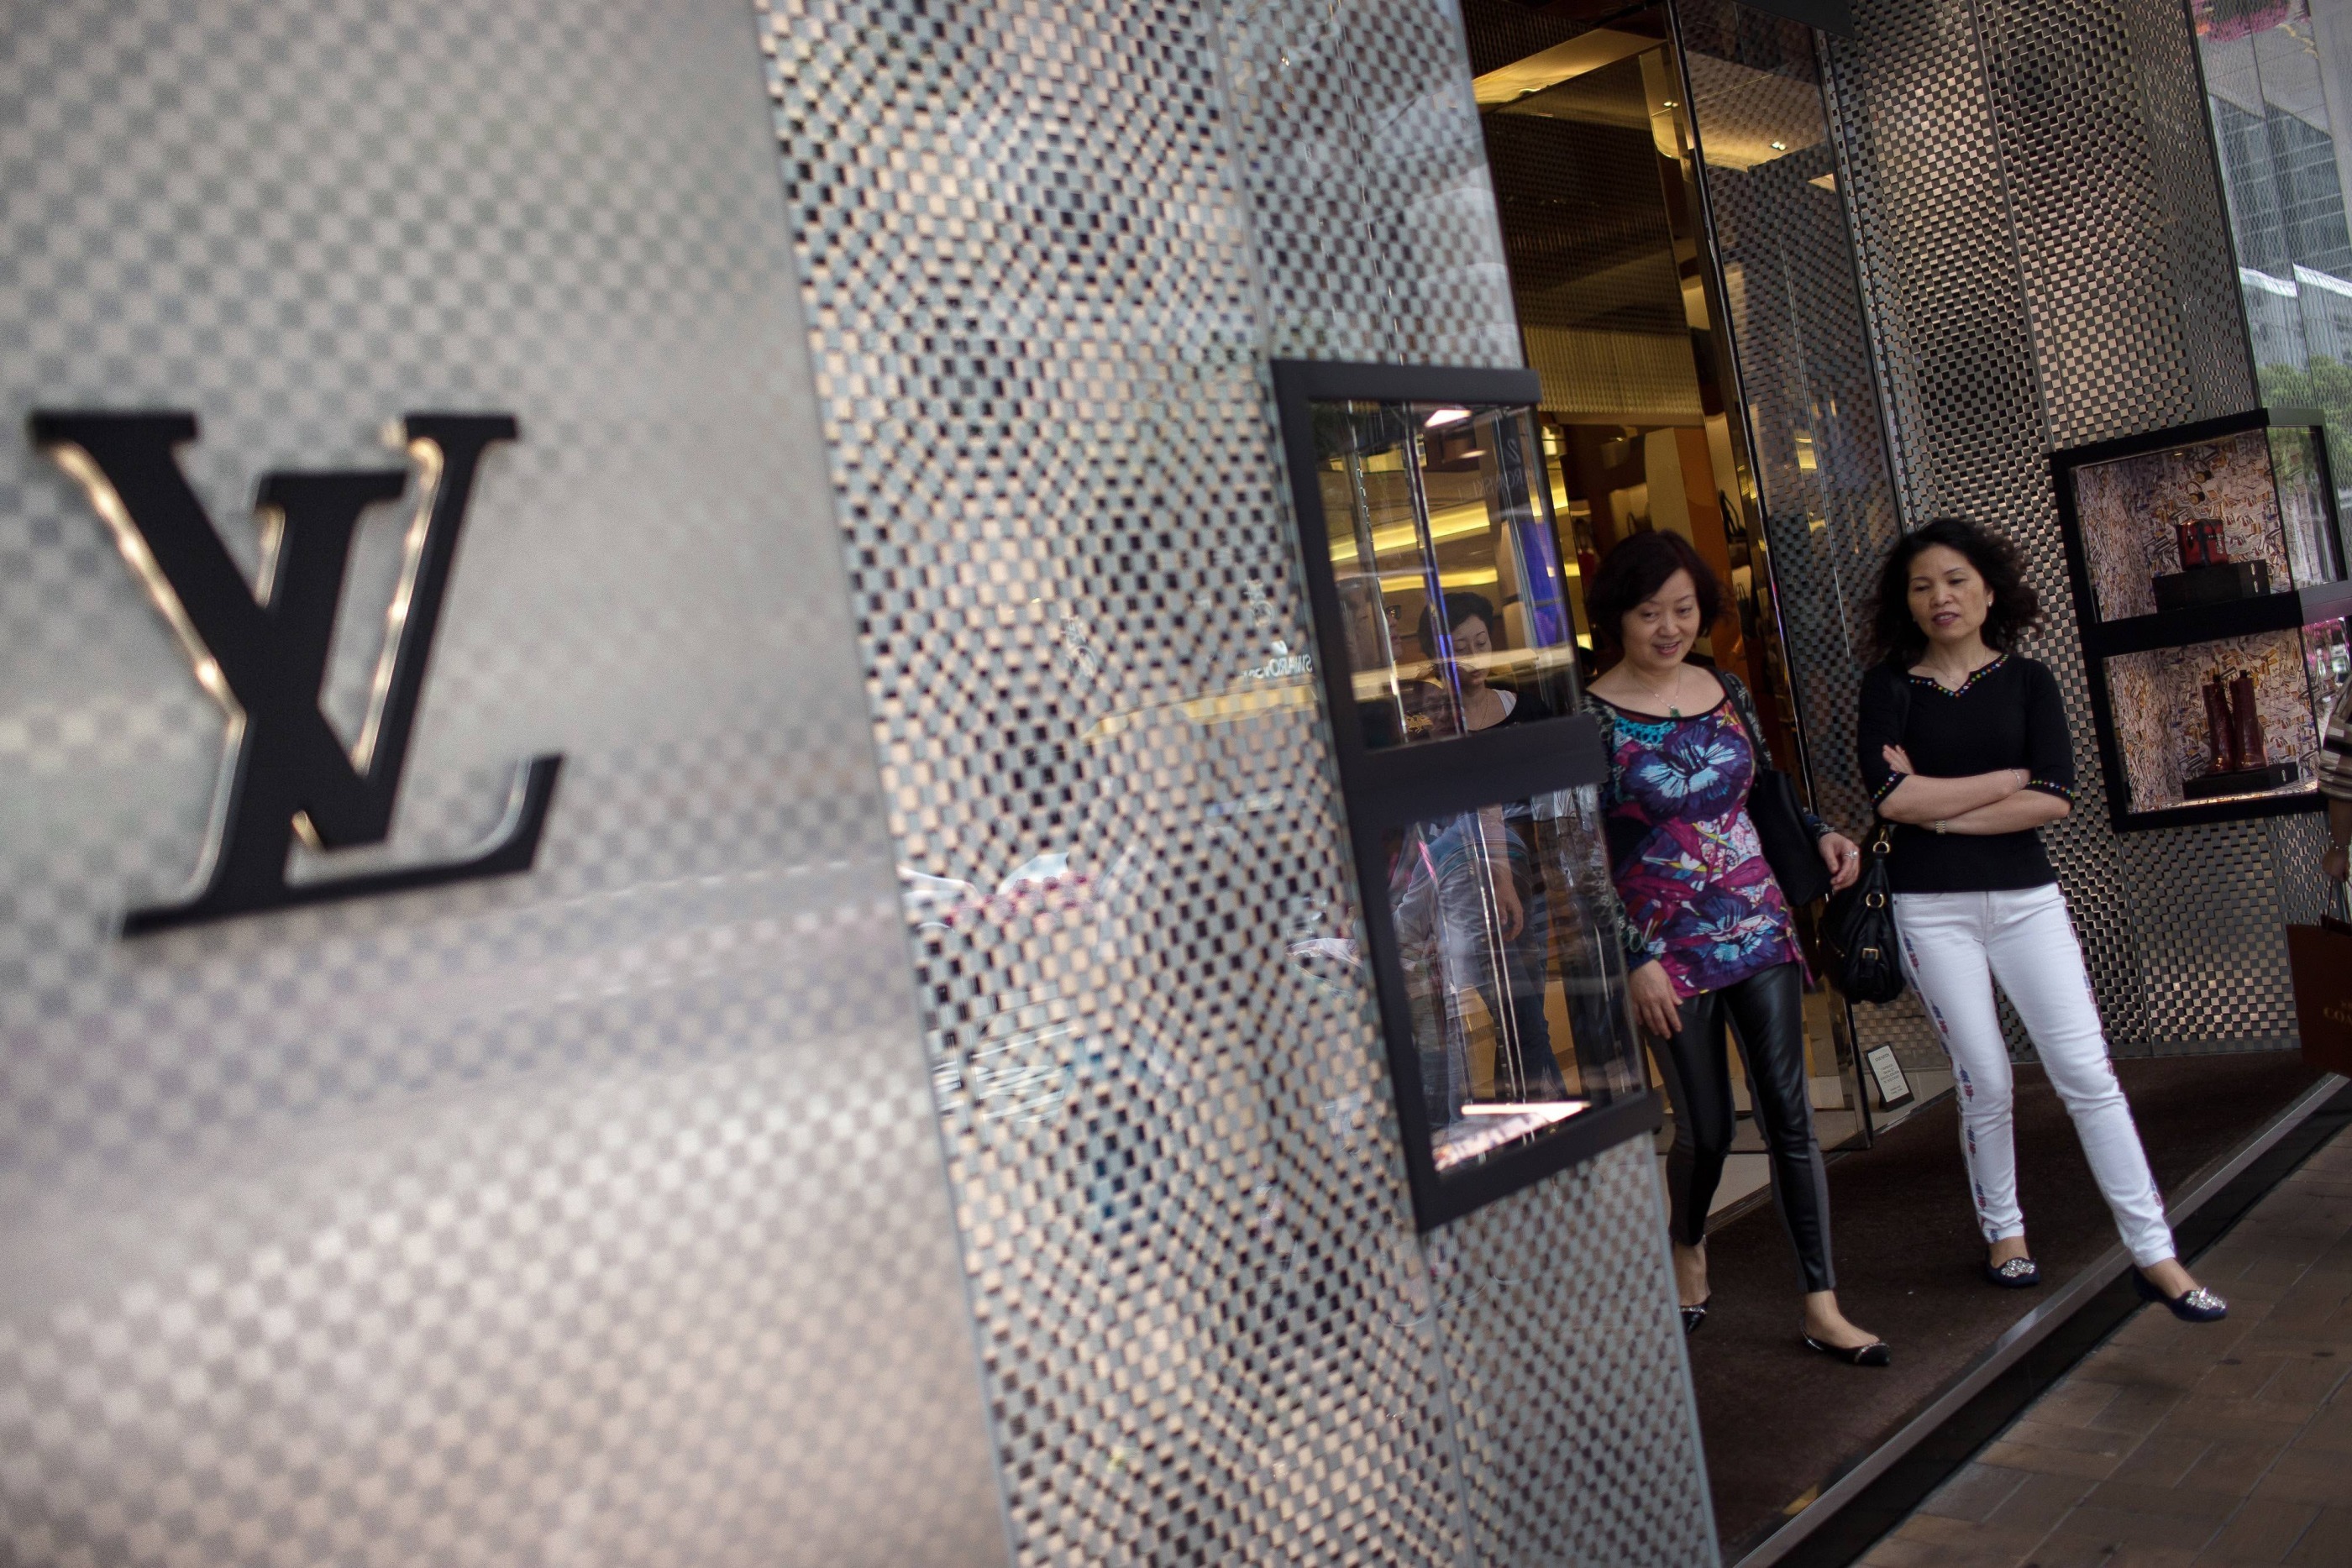 Louis Vuitton plans to close Hong Kong luxury store hit by protests